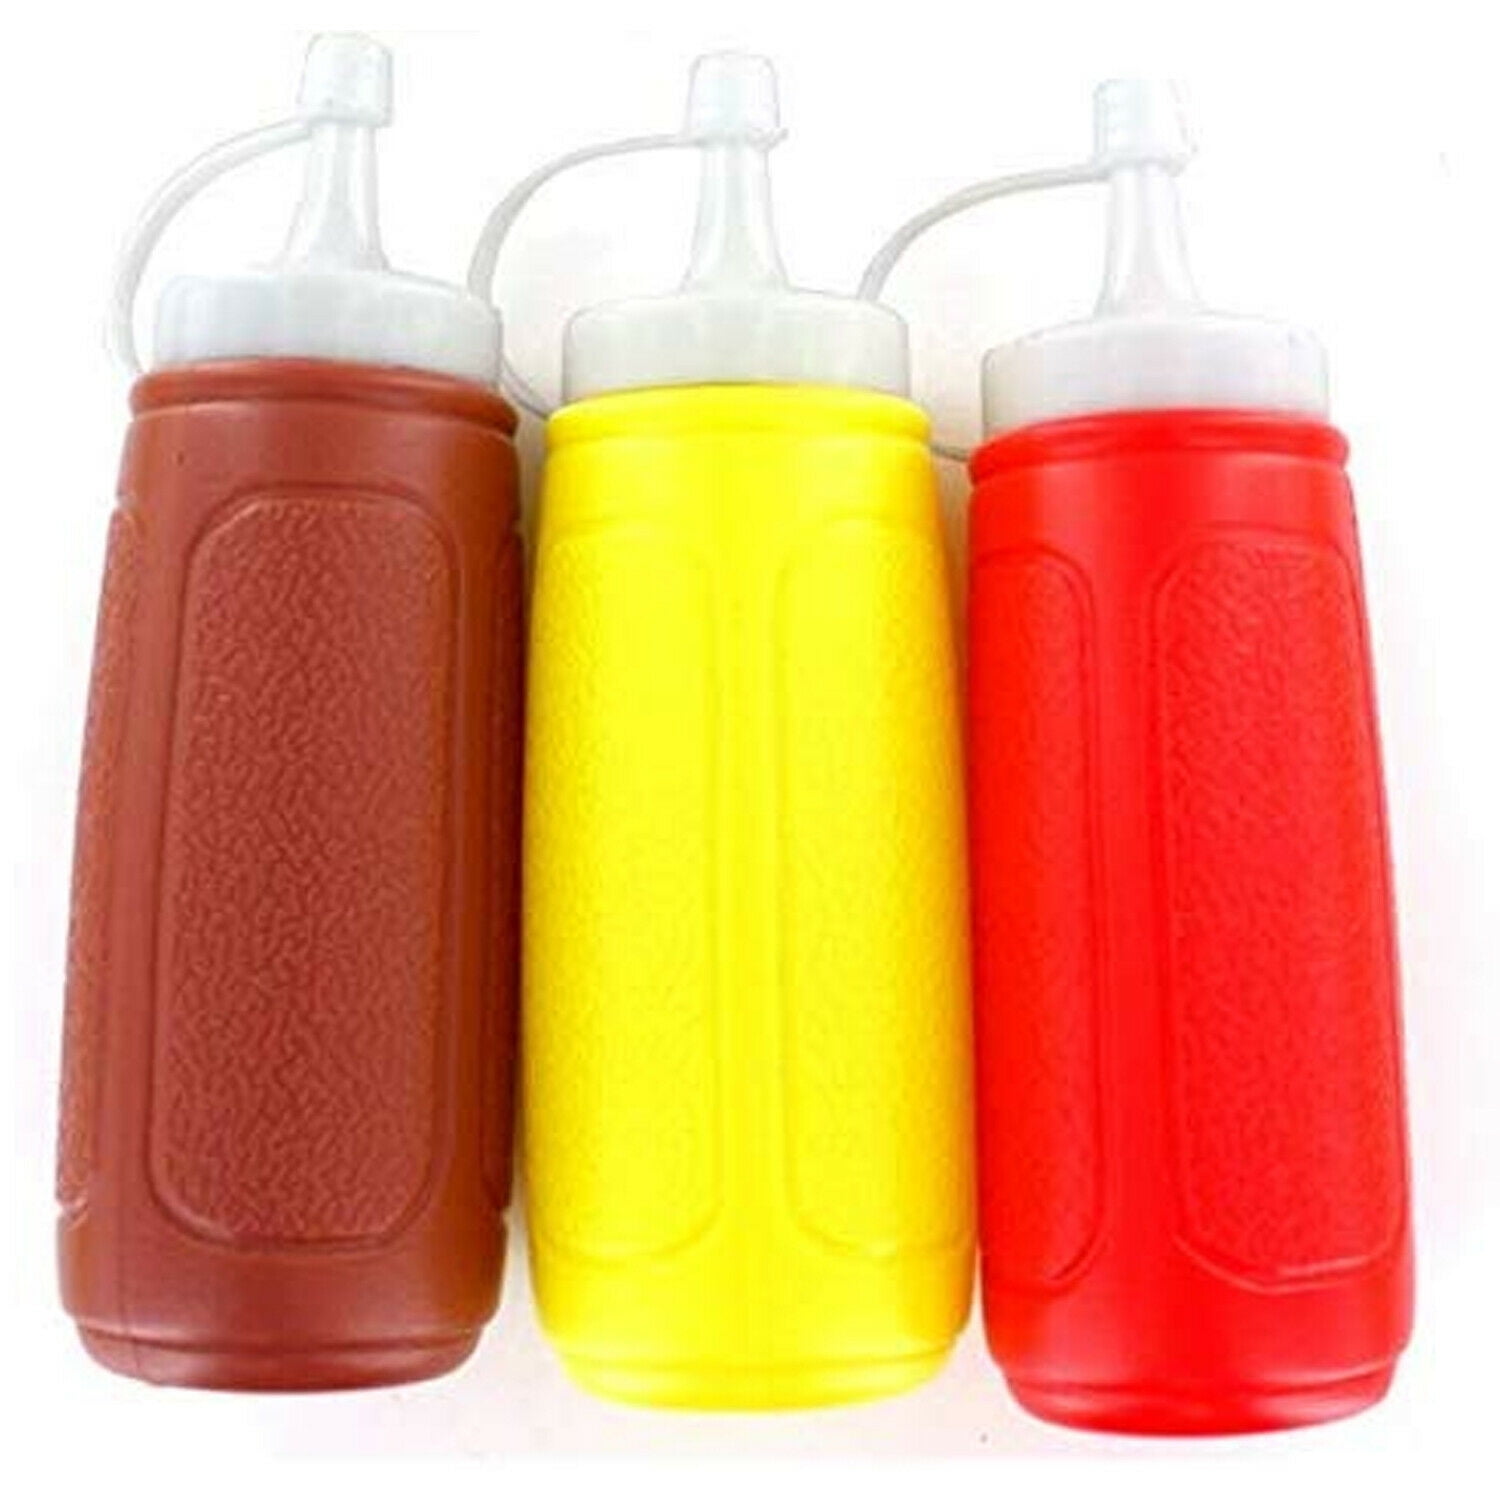 WXOIEOD 4 Pieces Mini Condiment Bottles, 30ml Samll Ketchup and Mustard  Bottle, Tiny Condiment Squee…See more WXOIEOD 4 Pieces Mini Condiment  Bottles